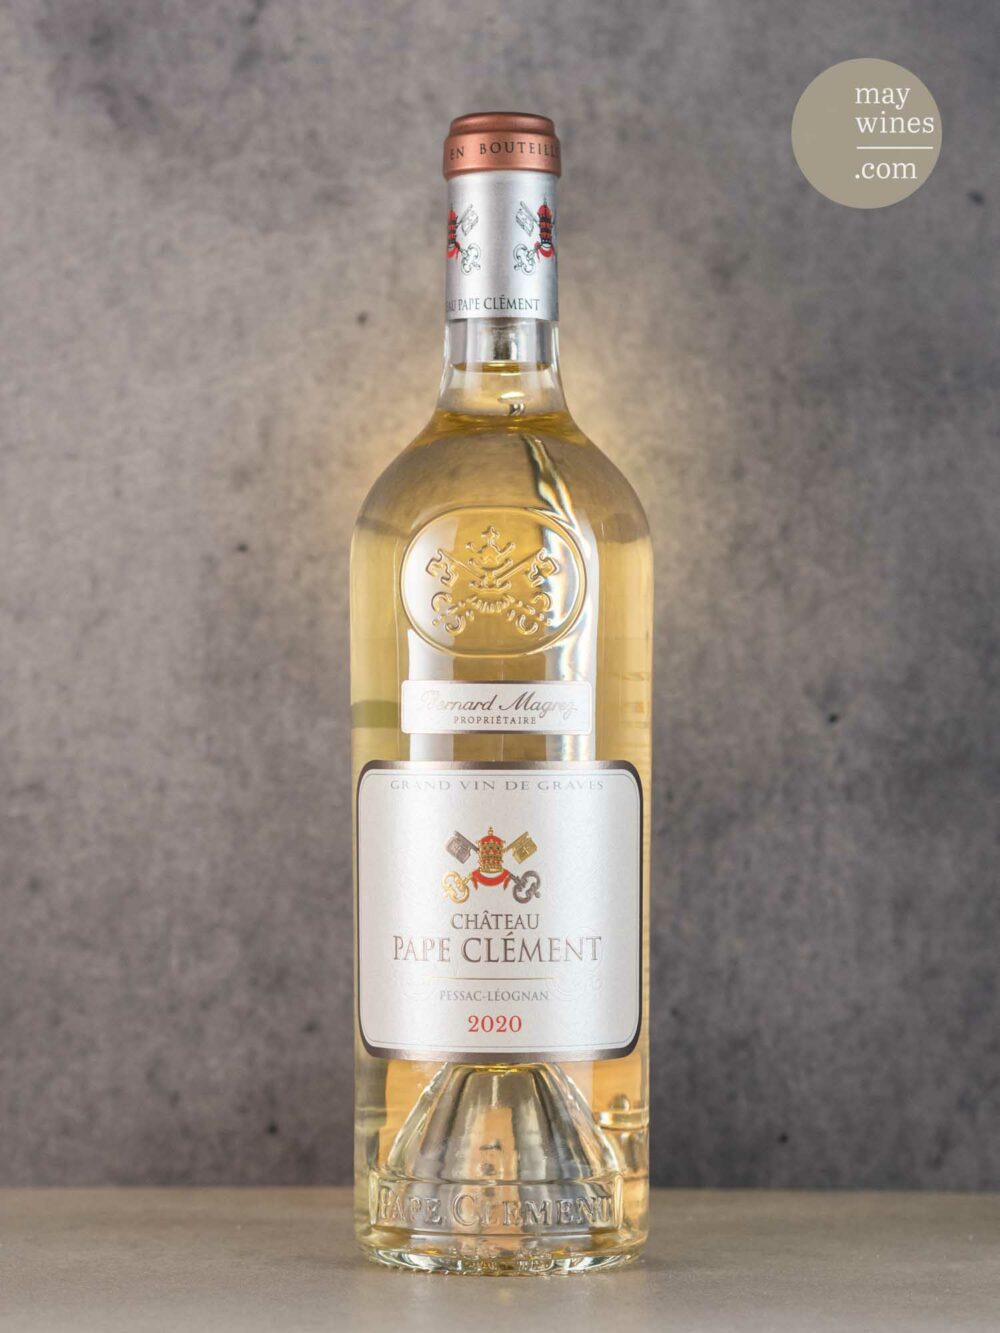 May Wines – Weißwein – 2020 Blanc - Château Pape Clément